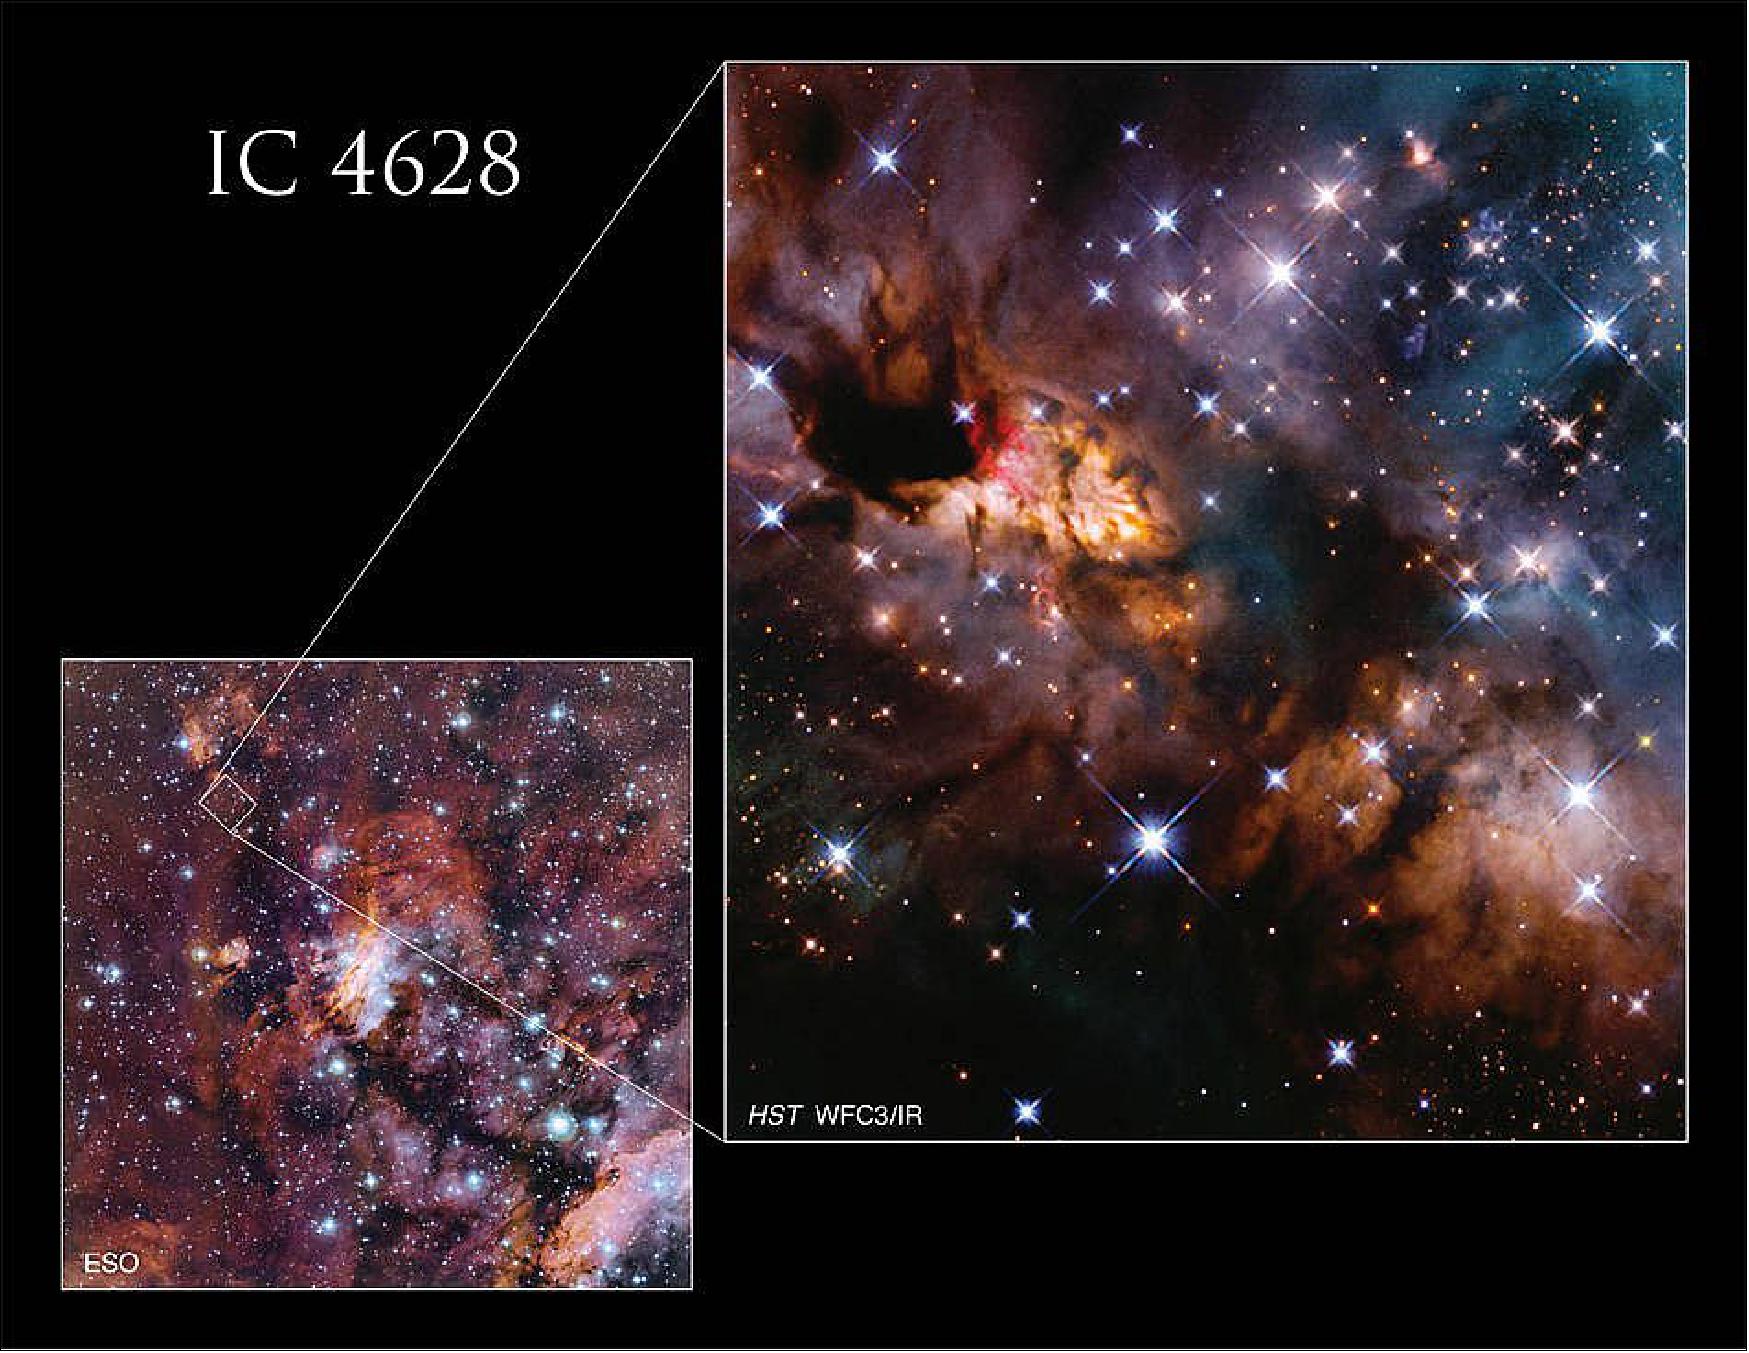 Figure 14: The Prawn Nebula lies south of the star Antares in the constellation Scorpius, the Scorpion. Hubble's focused view captures just a small portion of the vast star-forming region[image credits: NASA, ESA, J. Tan (Chalmers University of Technology), and ESO; Processing; Gladys Kober (NASA/Catholic University of America)]